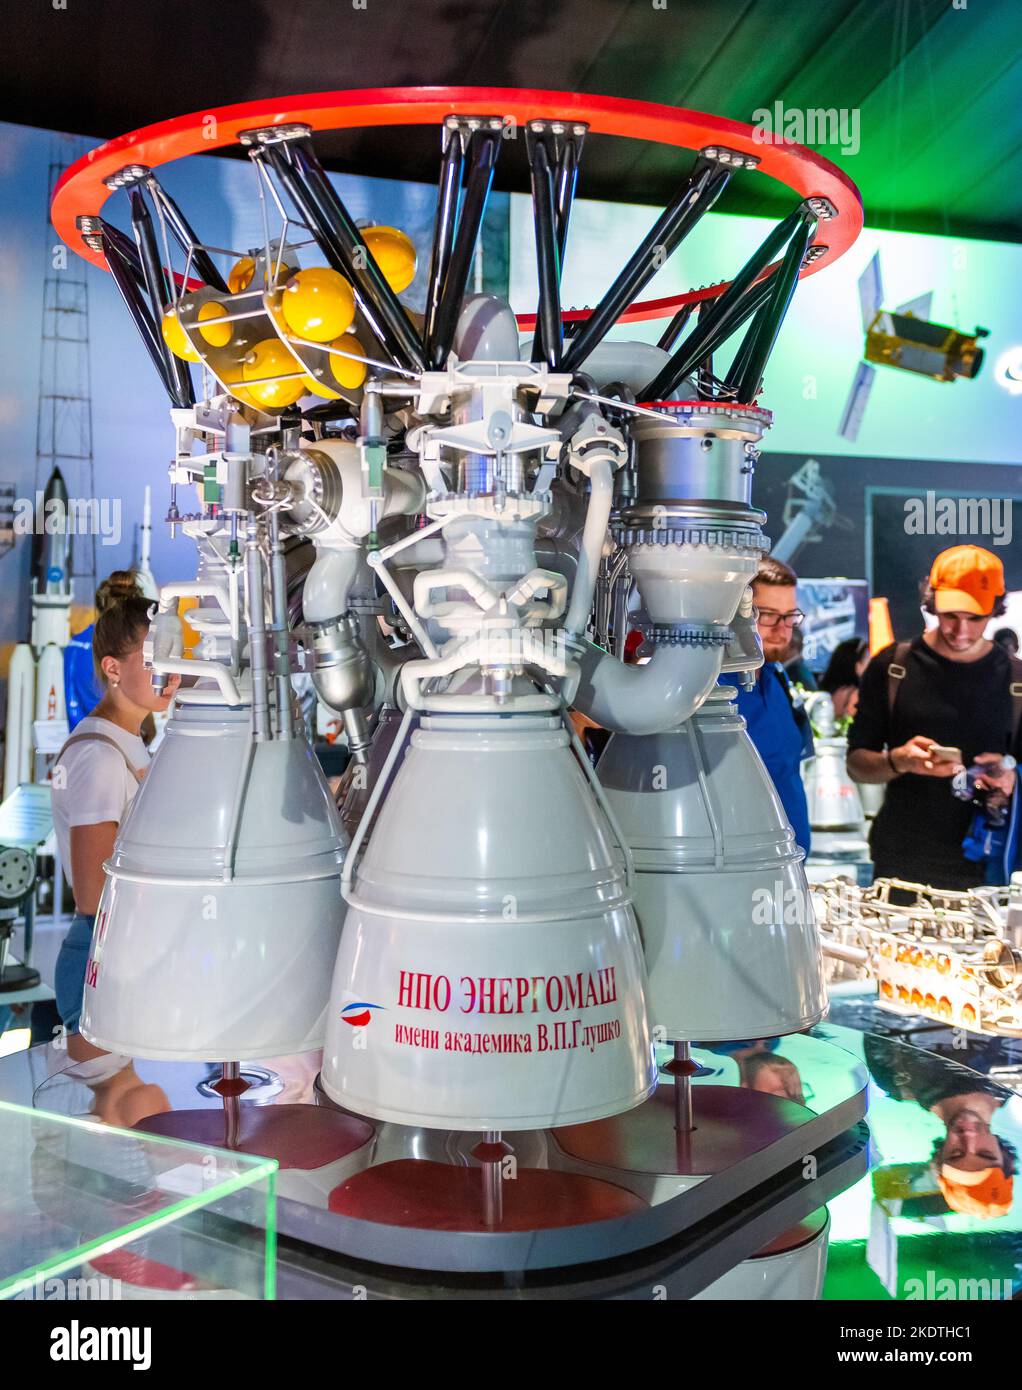 August 30, 2019, Moscow region, Russia. A mock-up of the Russian RD-171MV closed-cycle liquid rocket engine Stock Photo